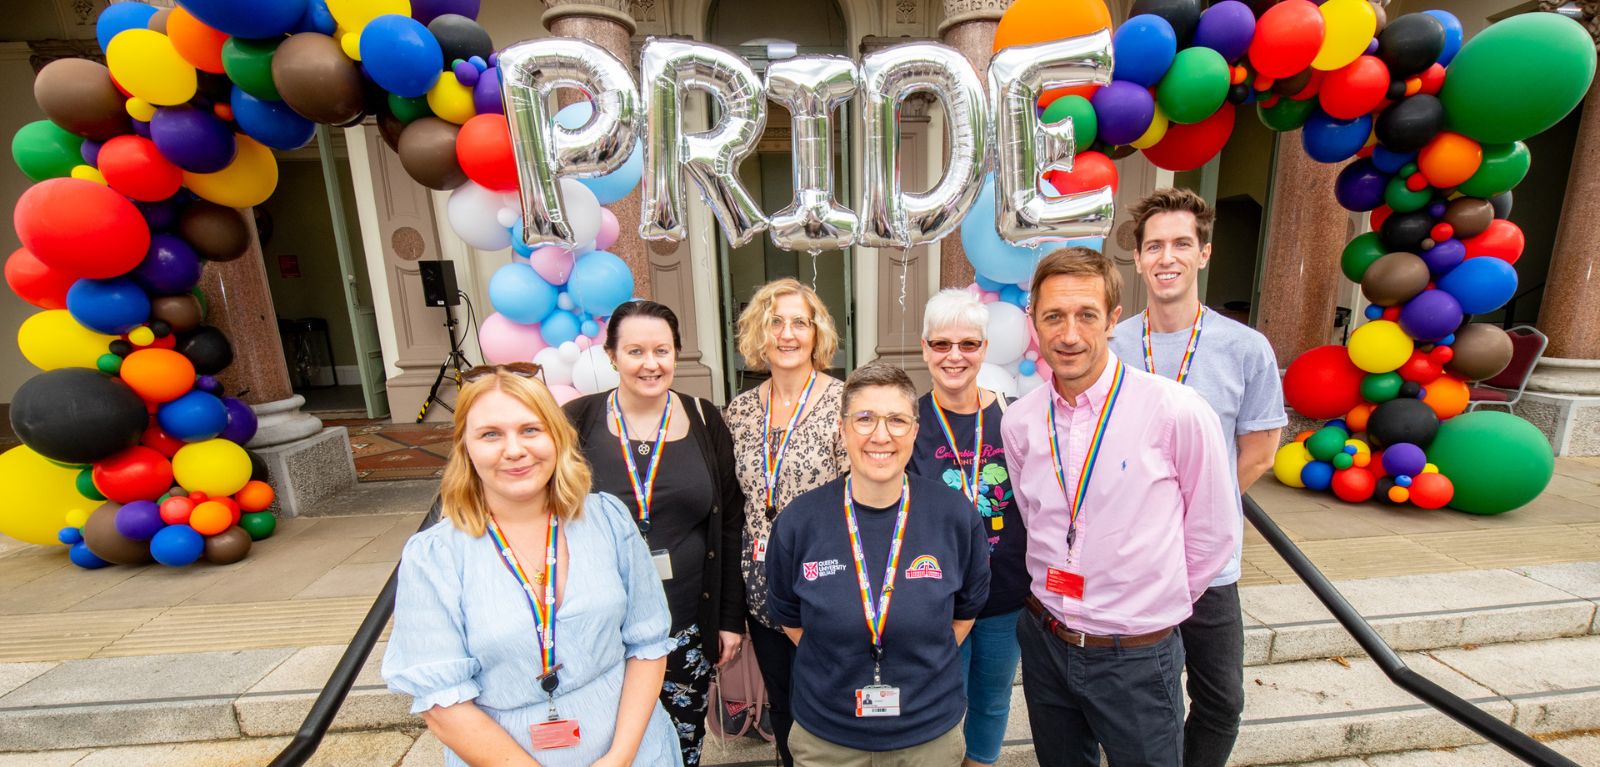 Staff pictured in front of Pride balloons